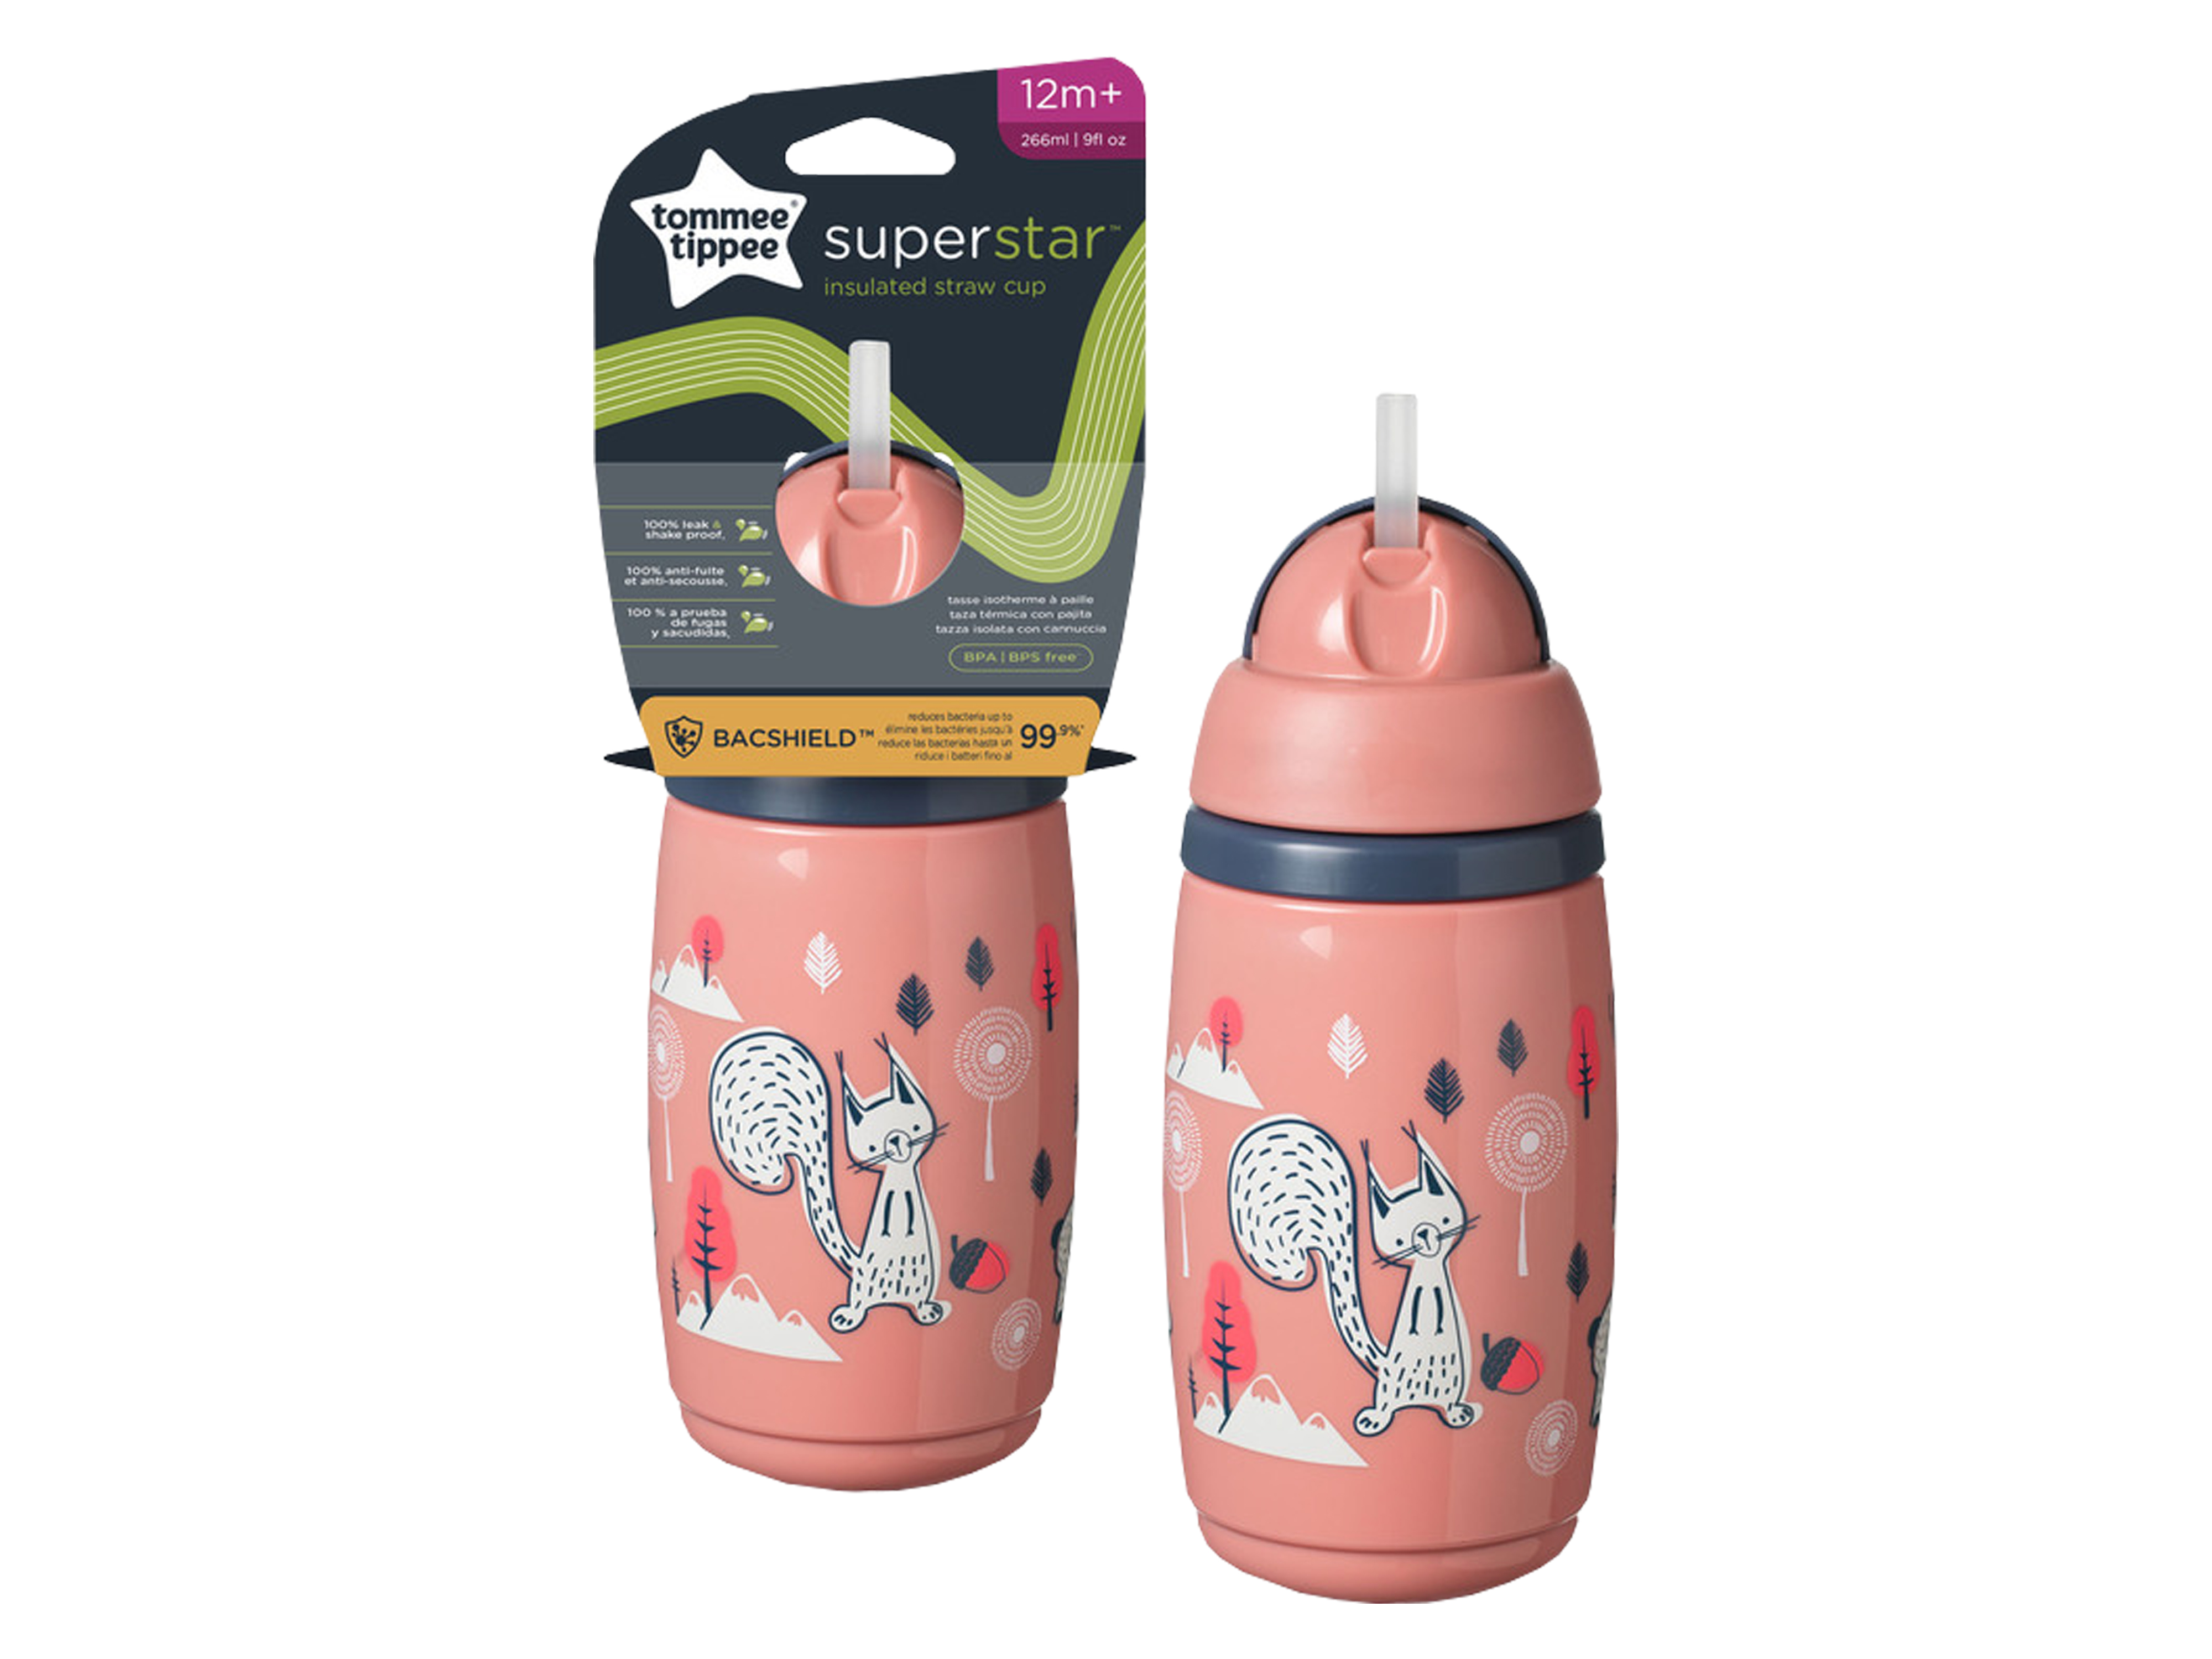 Superstar Insulated Straw Cup 12md+, rosa, 1 stk.